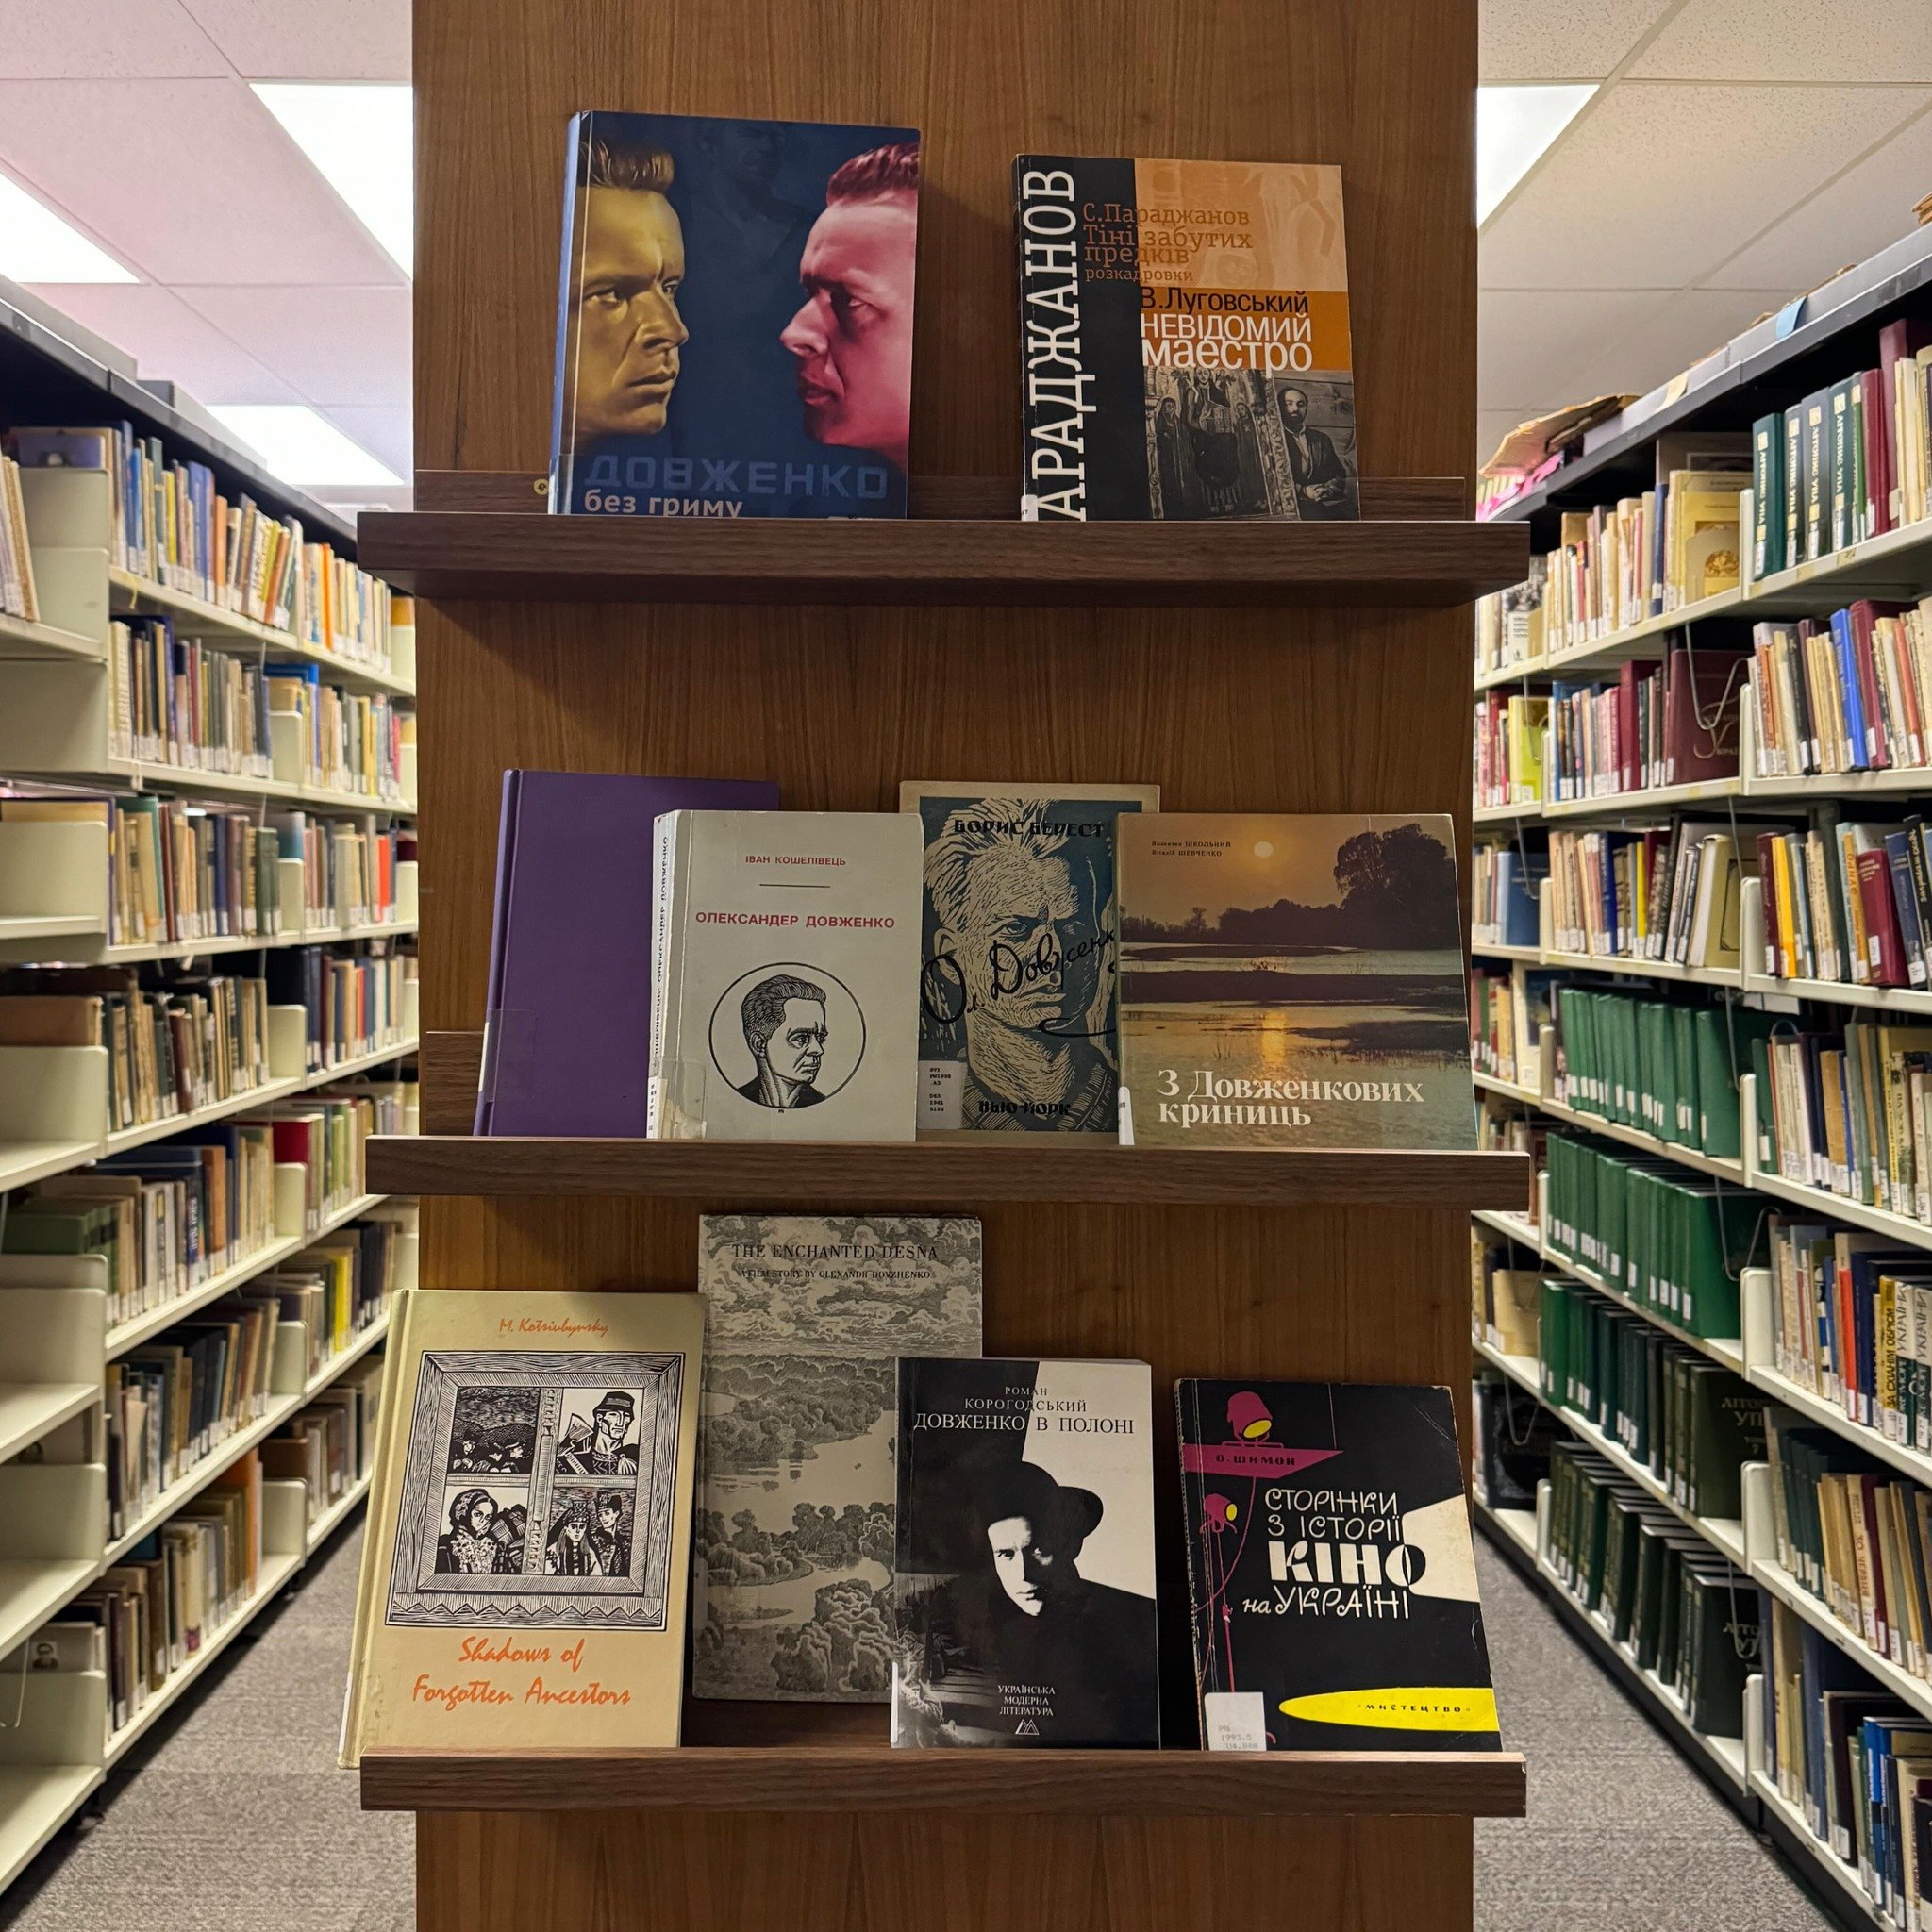 📚 New Summer Hours at Our Library! 🌞

Come explore our diverse collection, featuring both new and classic Ukrainian books.

Current Hours: Monday, Wednesday, Thursday: 12 PM &ndash; 8 PM

In the Photo: A glimpse of our curated shelf showcasing lite